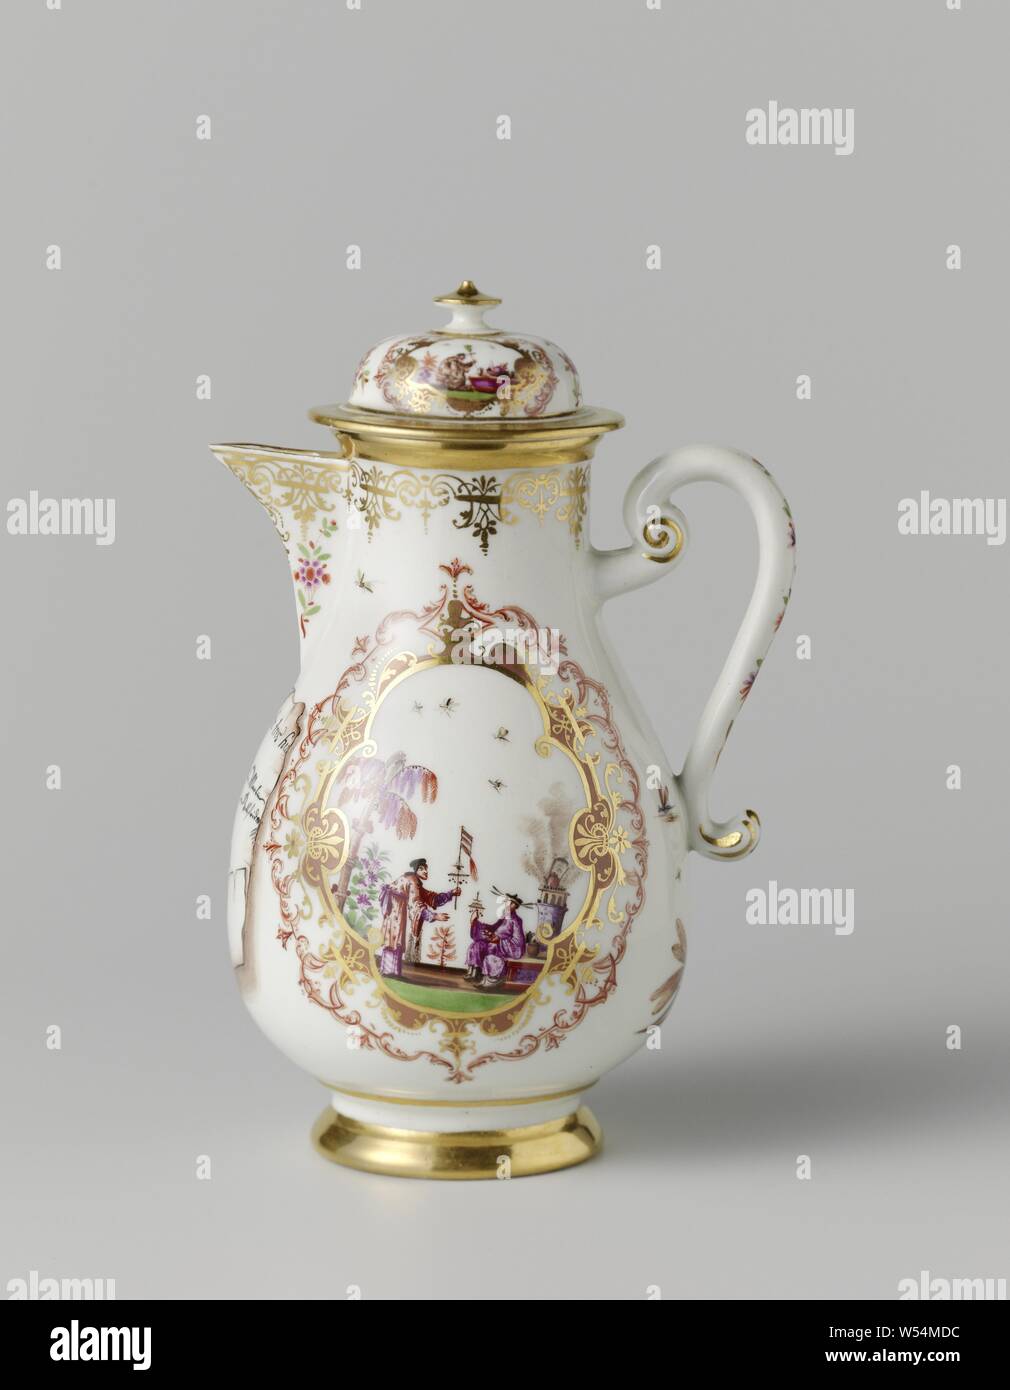 Coffee pot, painted in many colors with chinoiseries and a trompe l'oeuil, Coffee pot made of painted porcelain. The ear is C-shaped and the foot, mouth and spout are gilded. The jug is on body on both sides. Indian Blumen have been painted between the four steps of the lid and on the ear and spout. Under the spout a letter fragment and trompe l'oeuil with the text: 'Votre très hu [mble] Johann Martin Bottfridm ... nebst 1. Balln mit dem Sigl: CZ zur Fracht ge ... 6 Fev'. The jug is not marked., Meissener Porzellan Manufaktur, Meissen, 1729, porcelain (material), w 14 cm h 17.7 cm d 7 cm Stock Photo